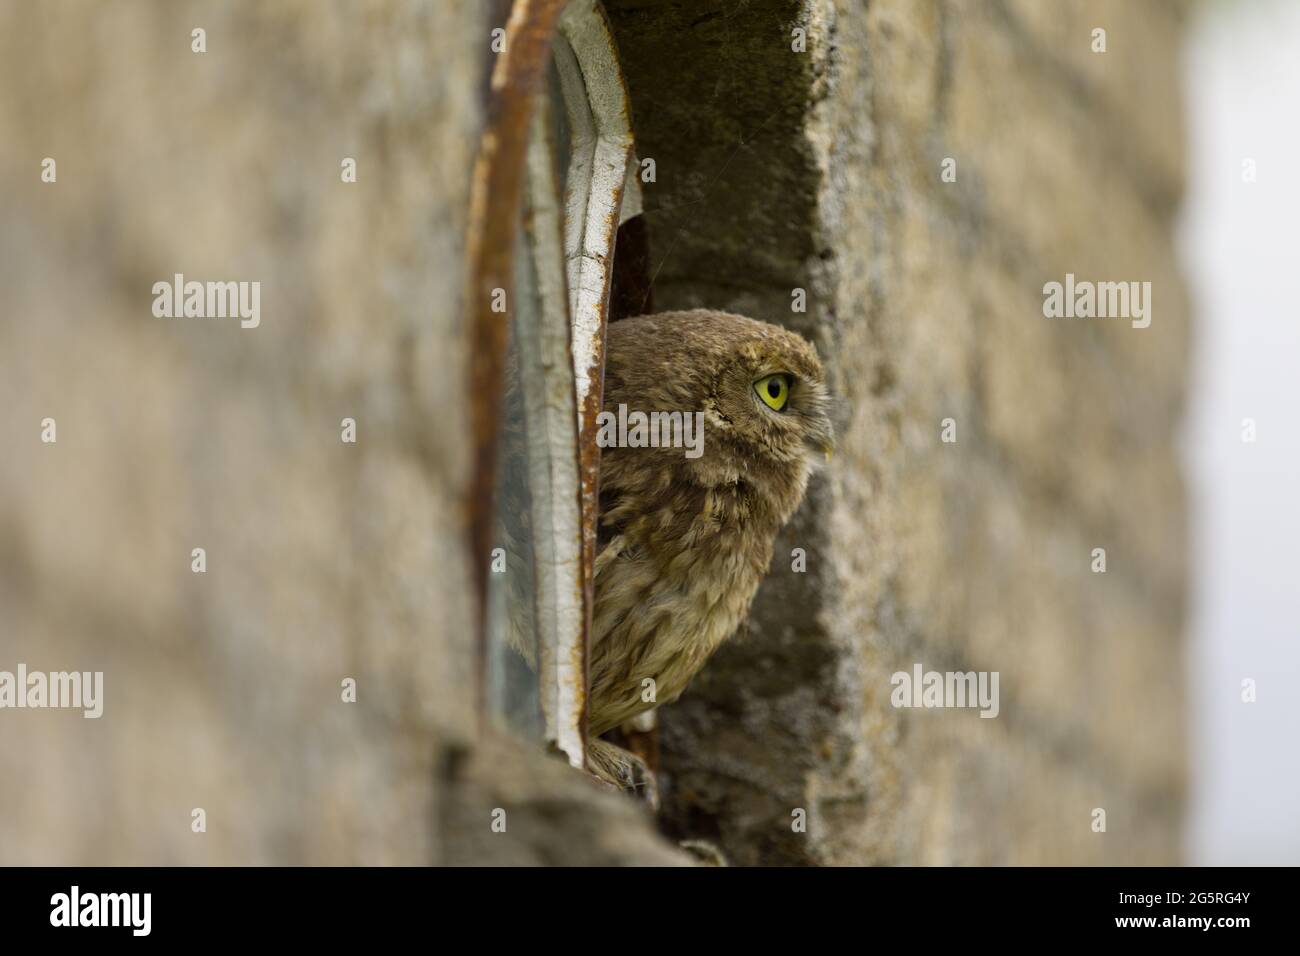 A close up of a little owl (Athene noctua) looking at you from a broken window. Stock Photo